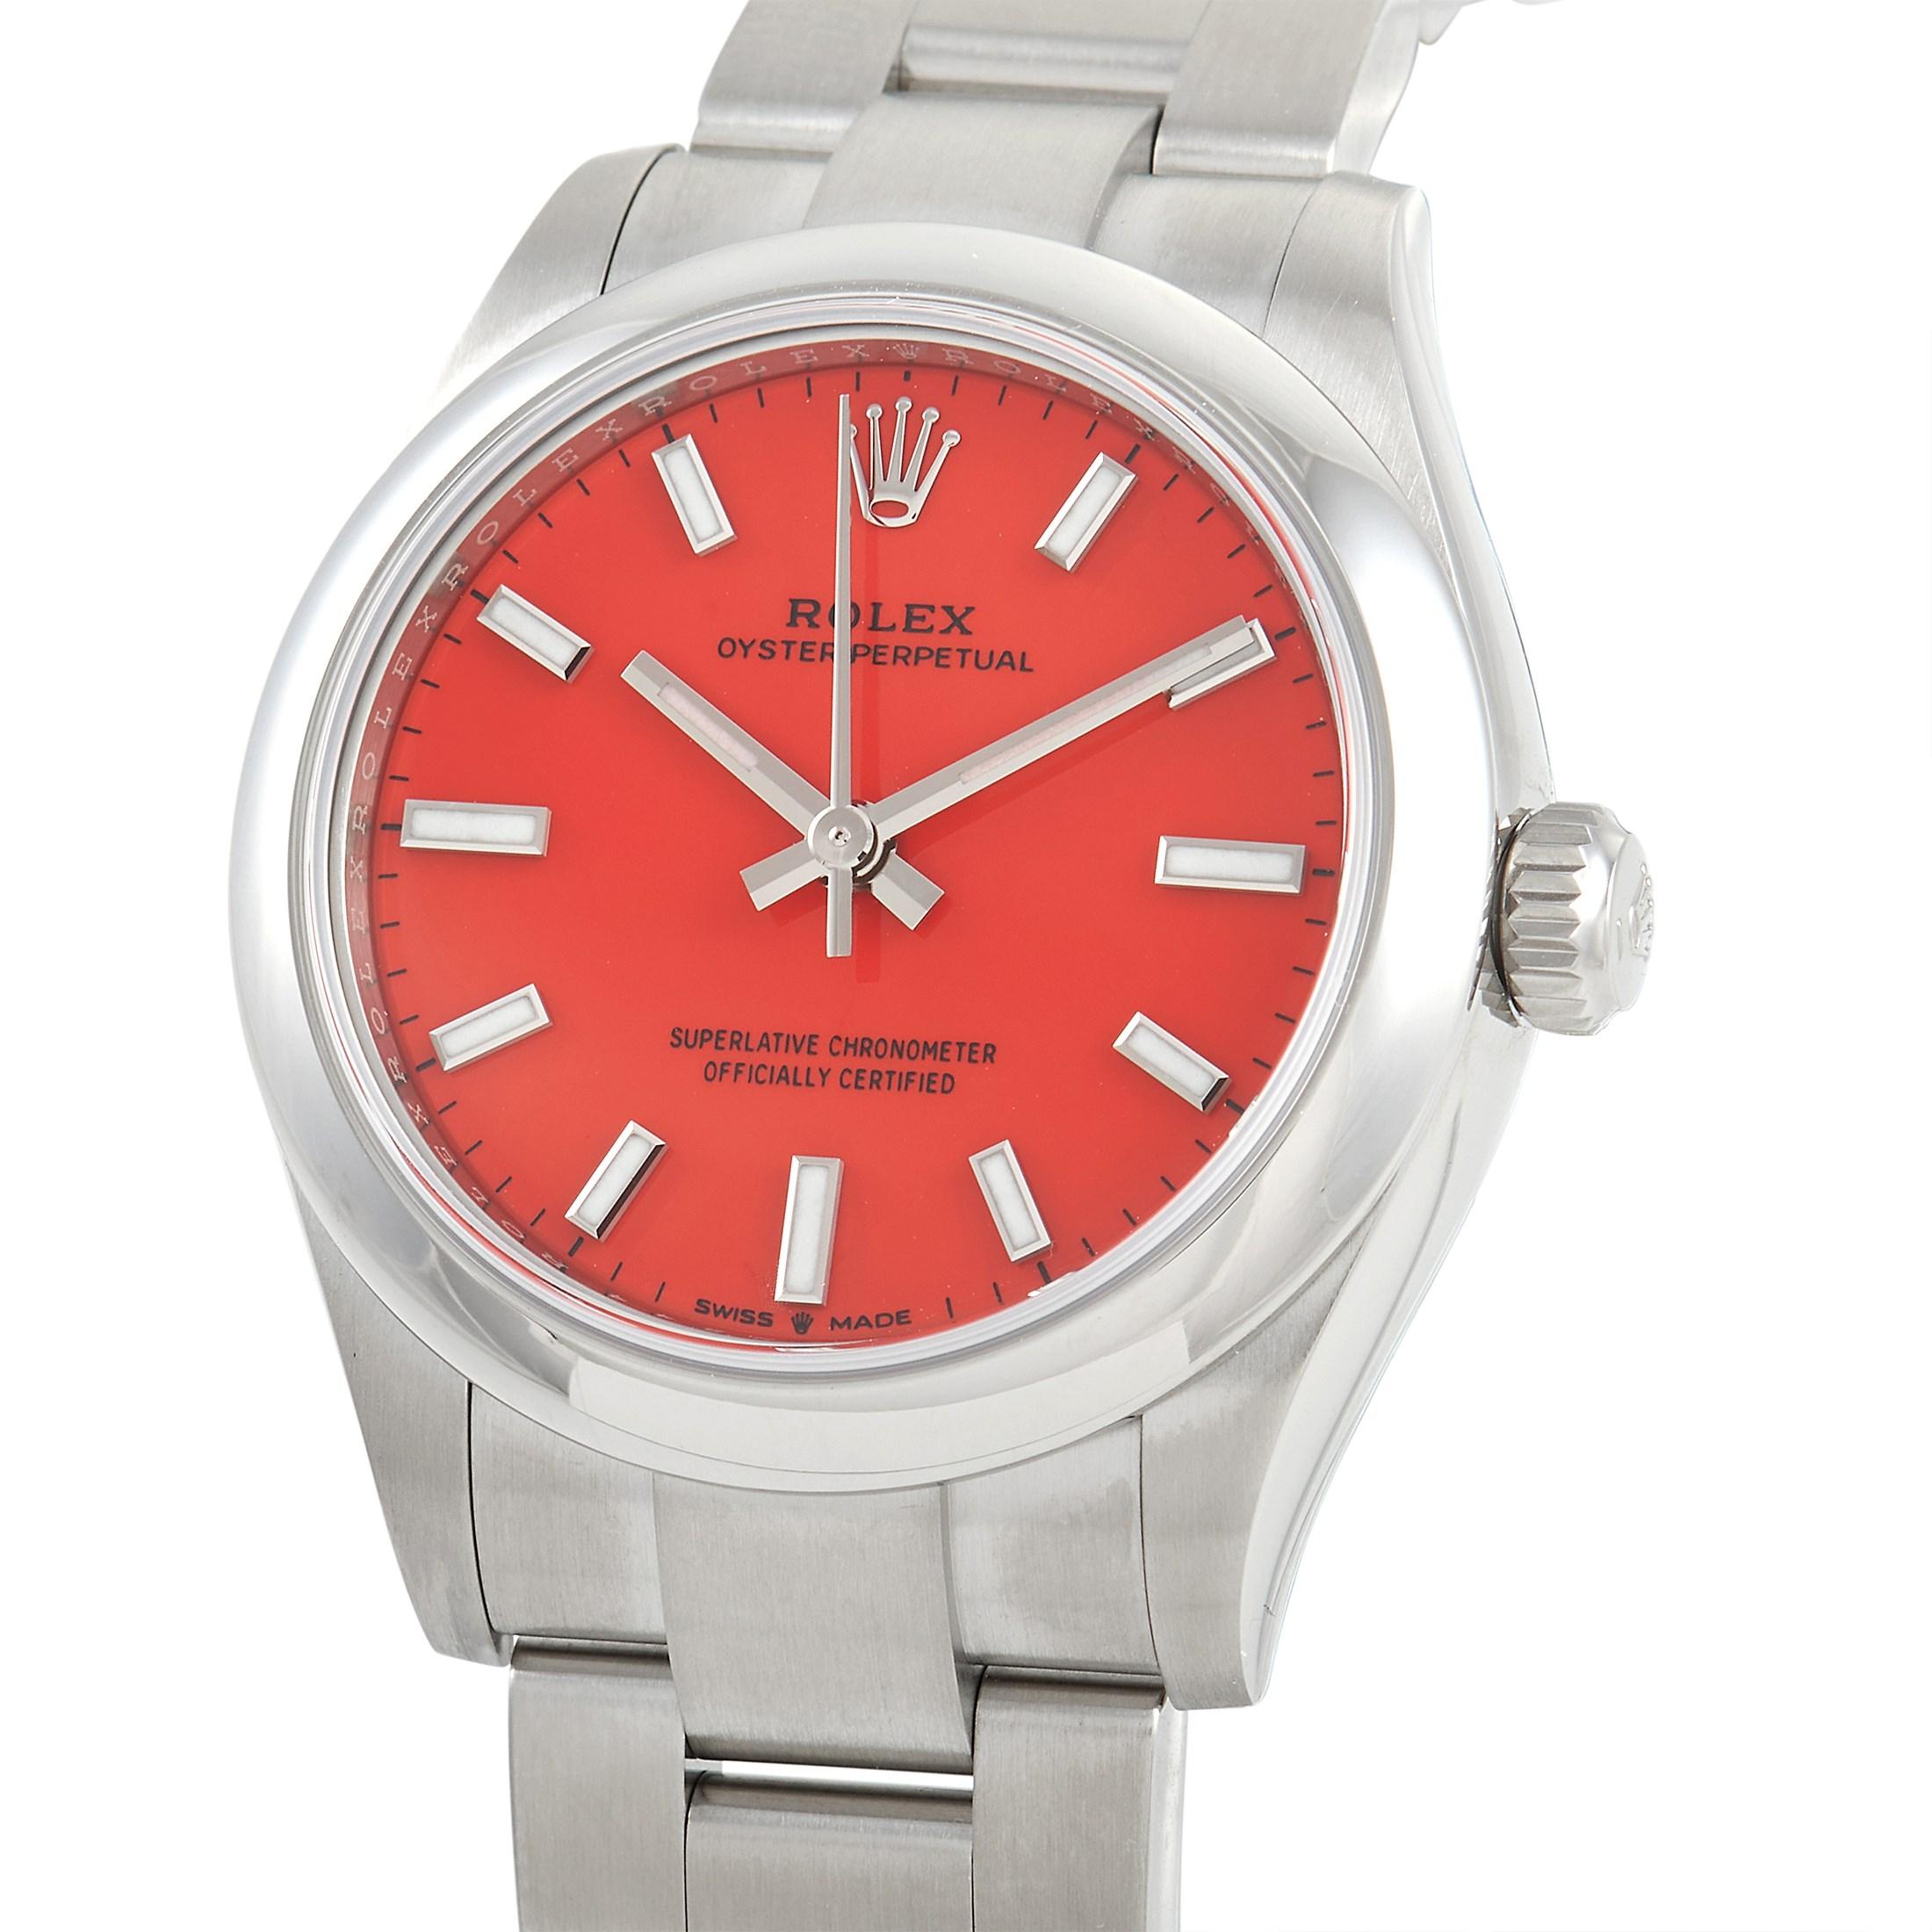 The Rolex Oyster Perpetual Ladies Watch, reference number 277200, is an impeccably crafted piece that will continually impress. 

On this striking timepiece, you’ll find a 31mm case crafted from shimmering stainless steel - but it’s the bold coral